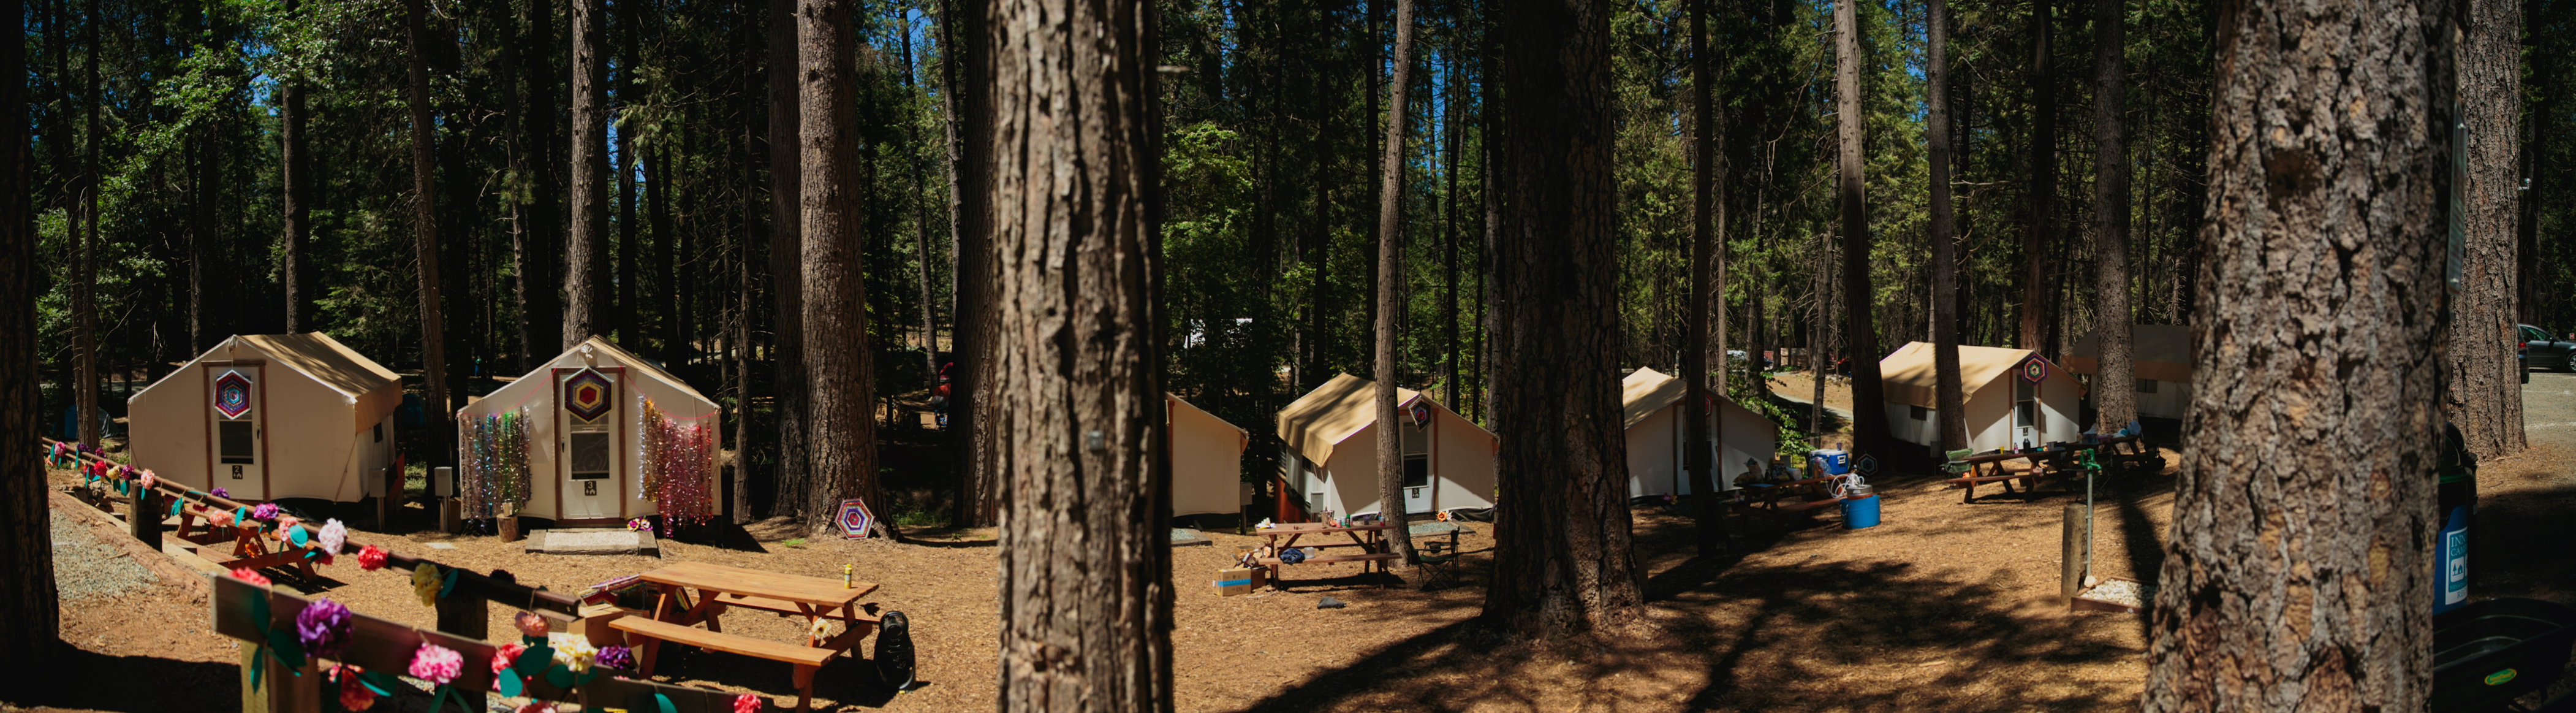 A pano of a row of cabins at the Inn Town Campground.